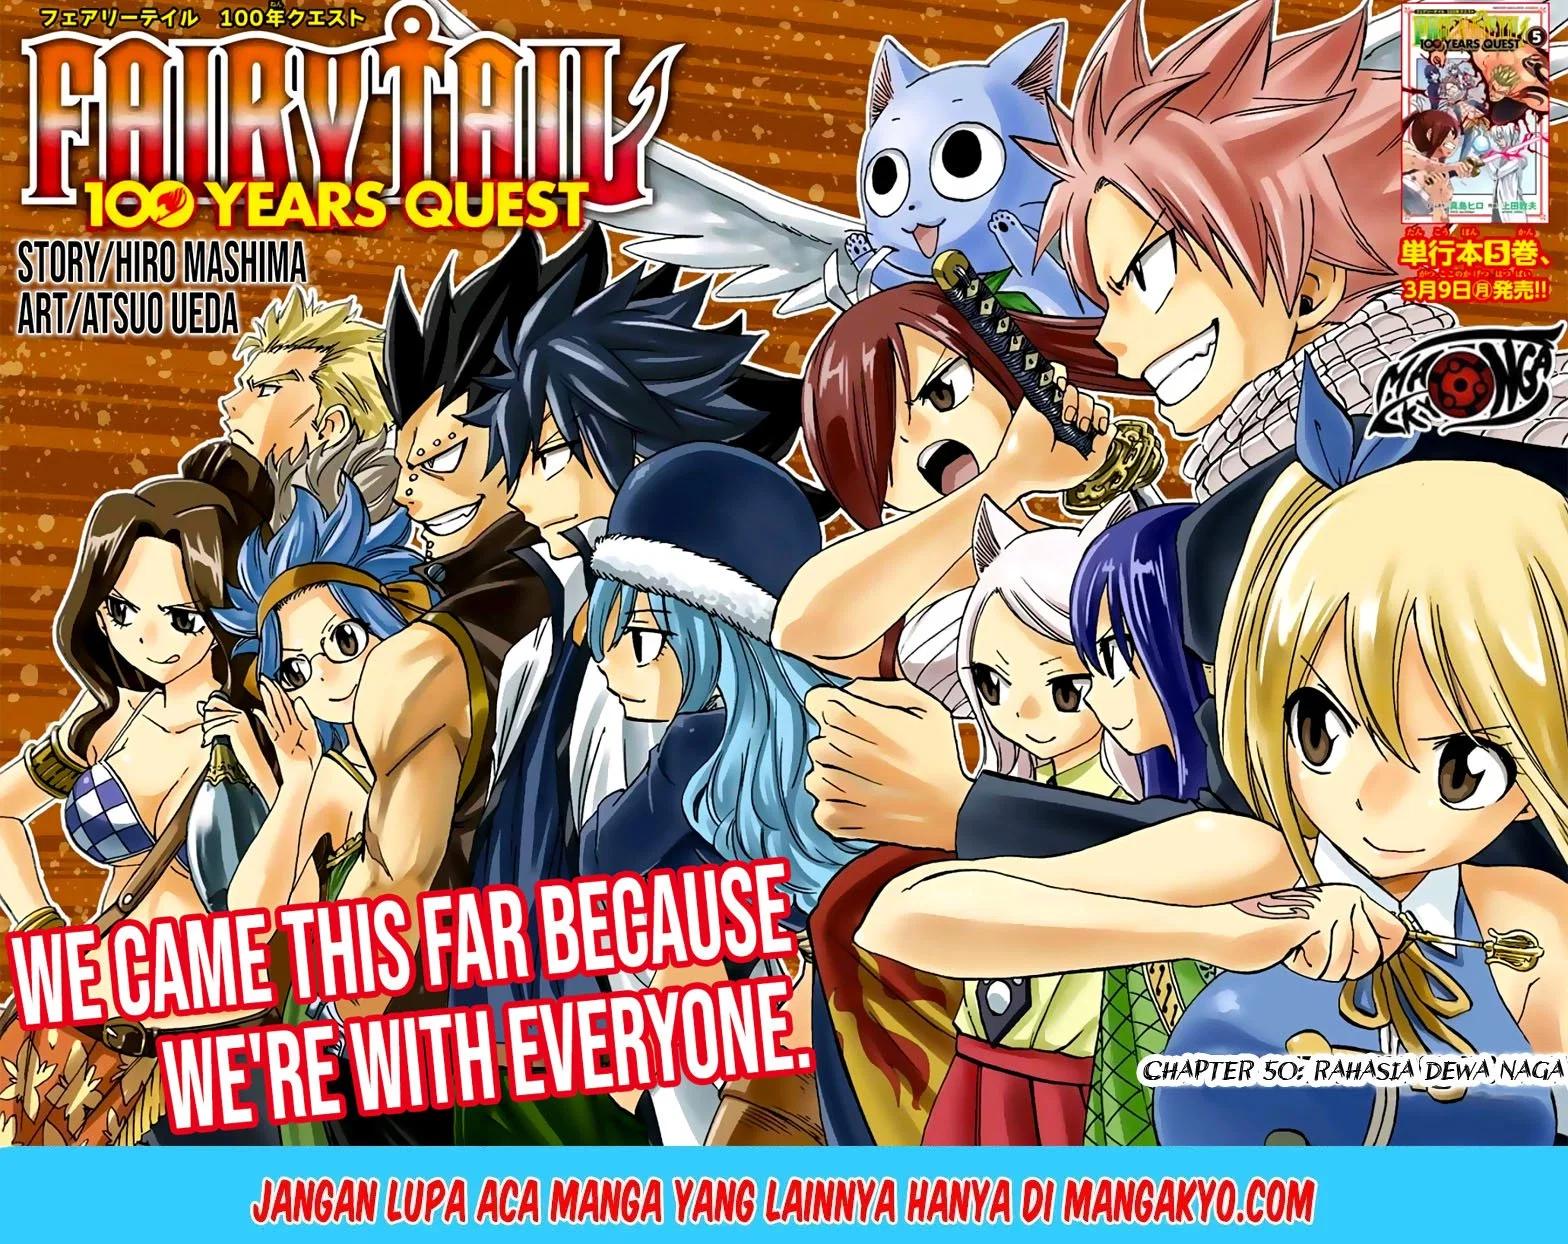 Fairy Tail: 100 Years Quest Chapter 50